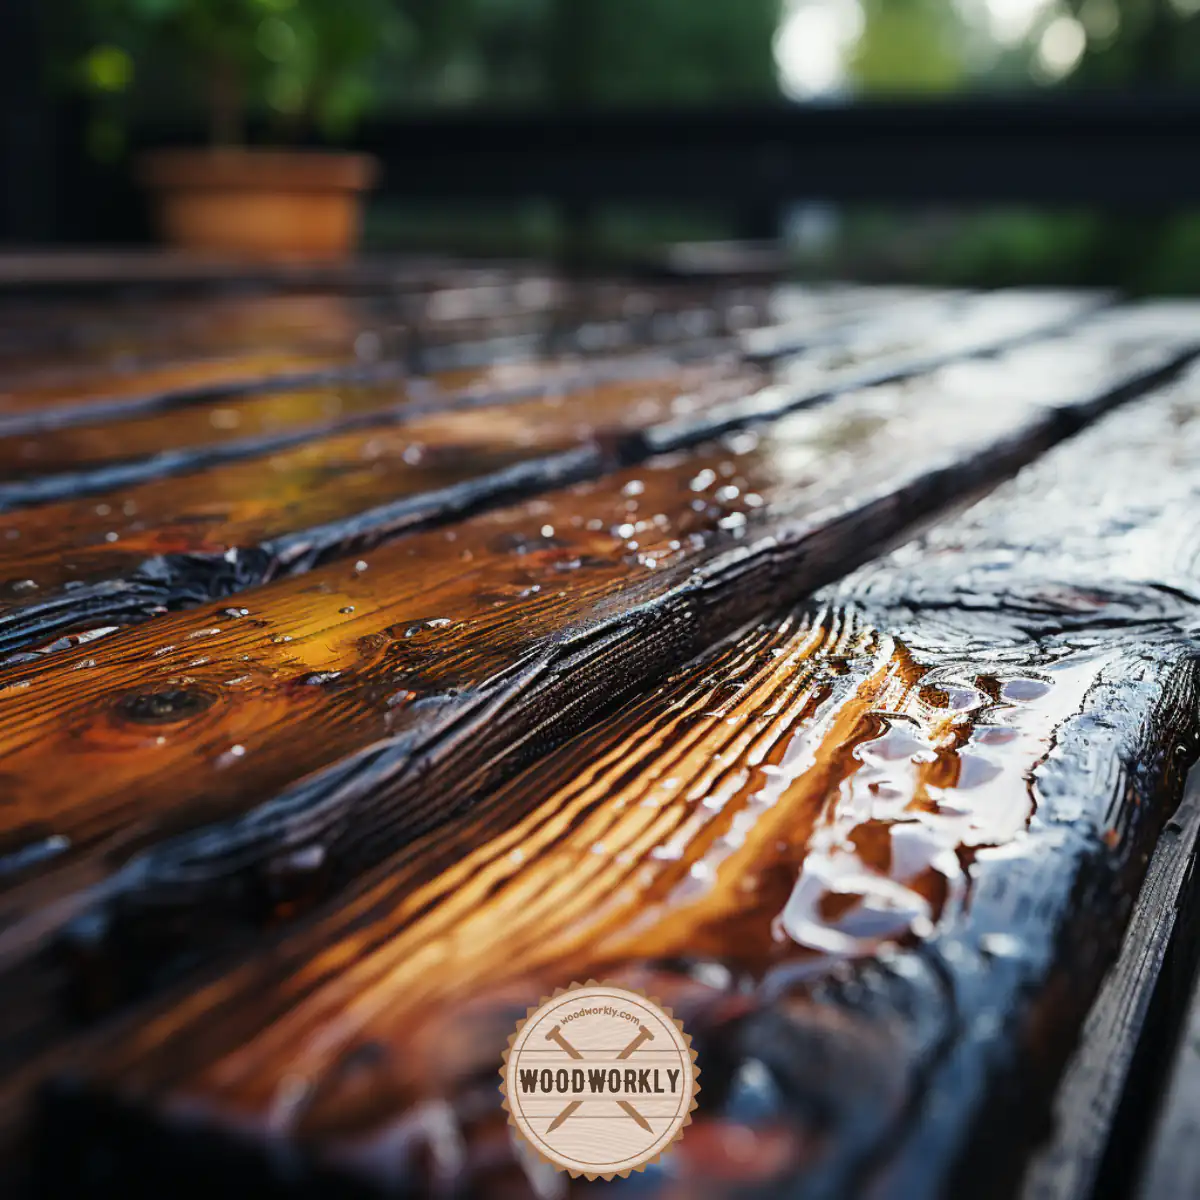 Wet wood surface after raining